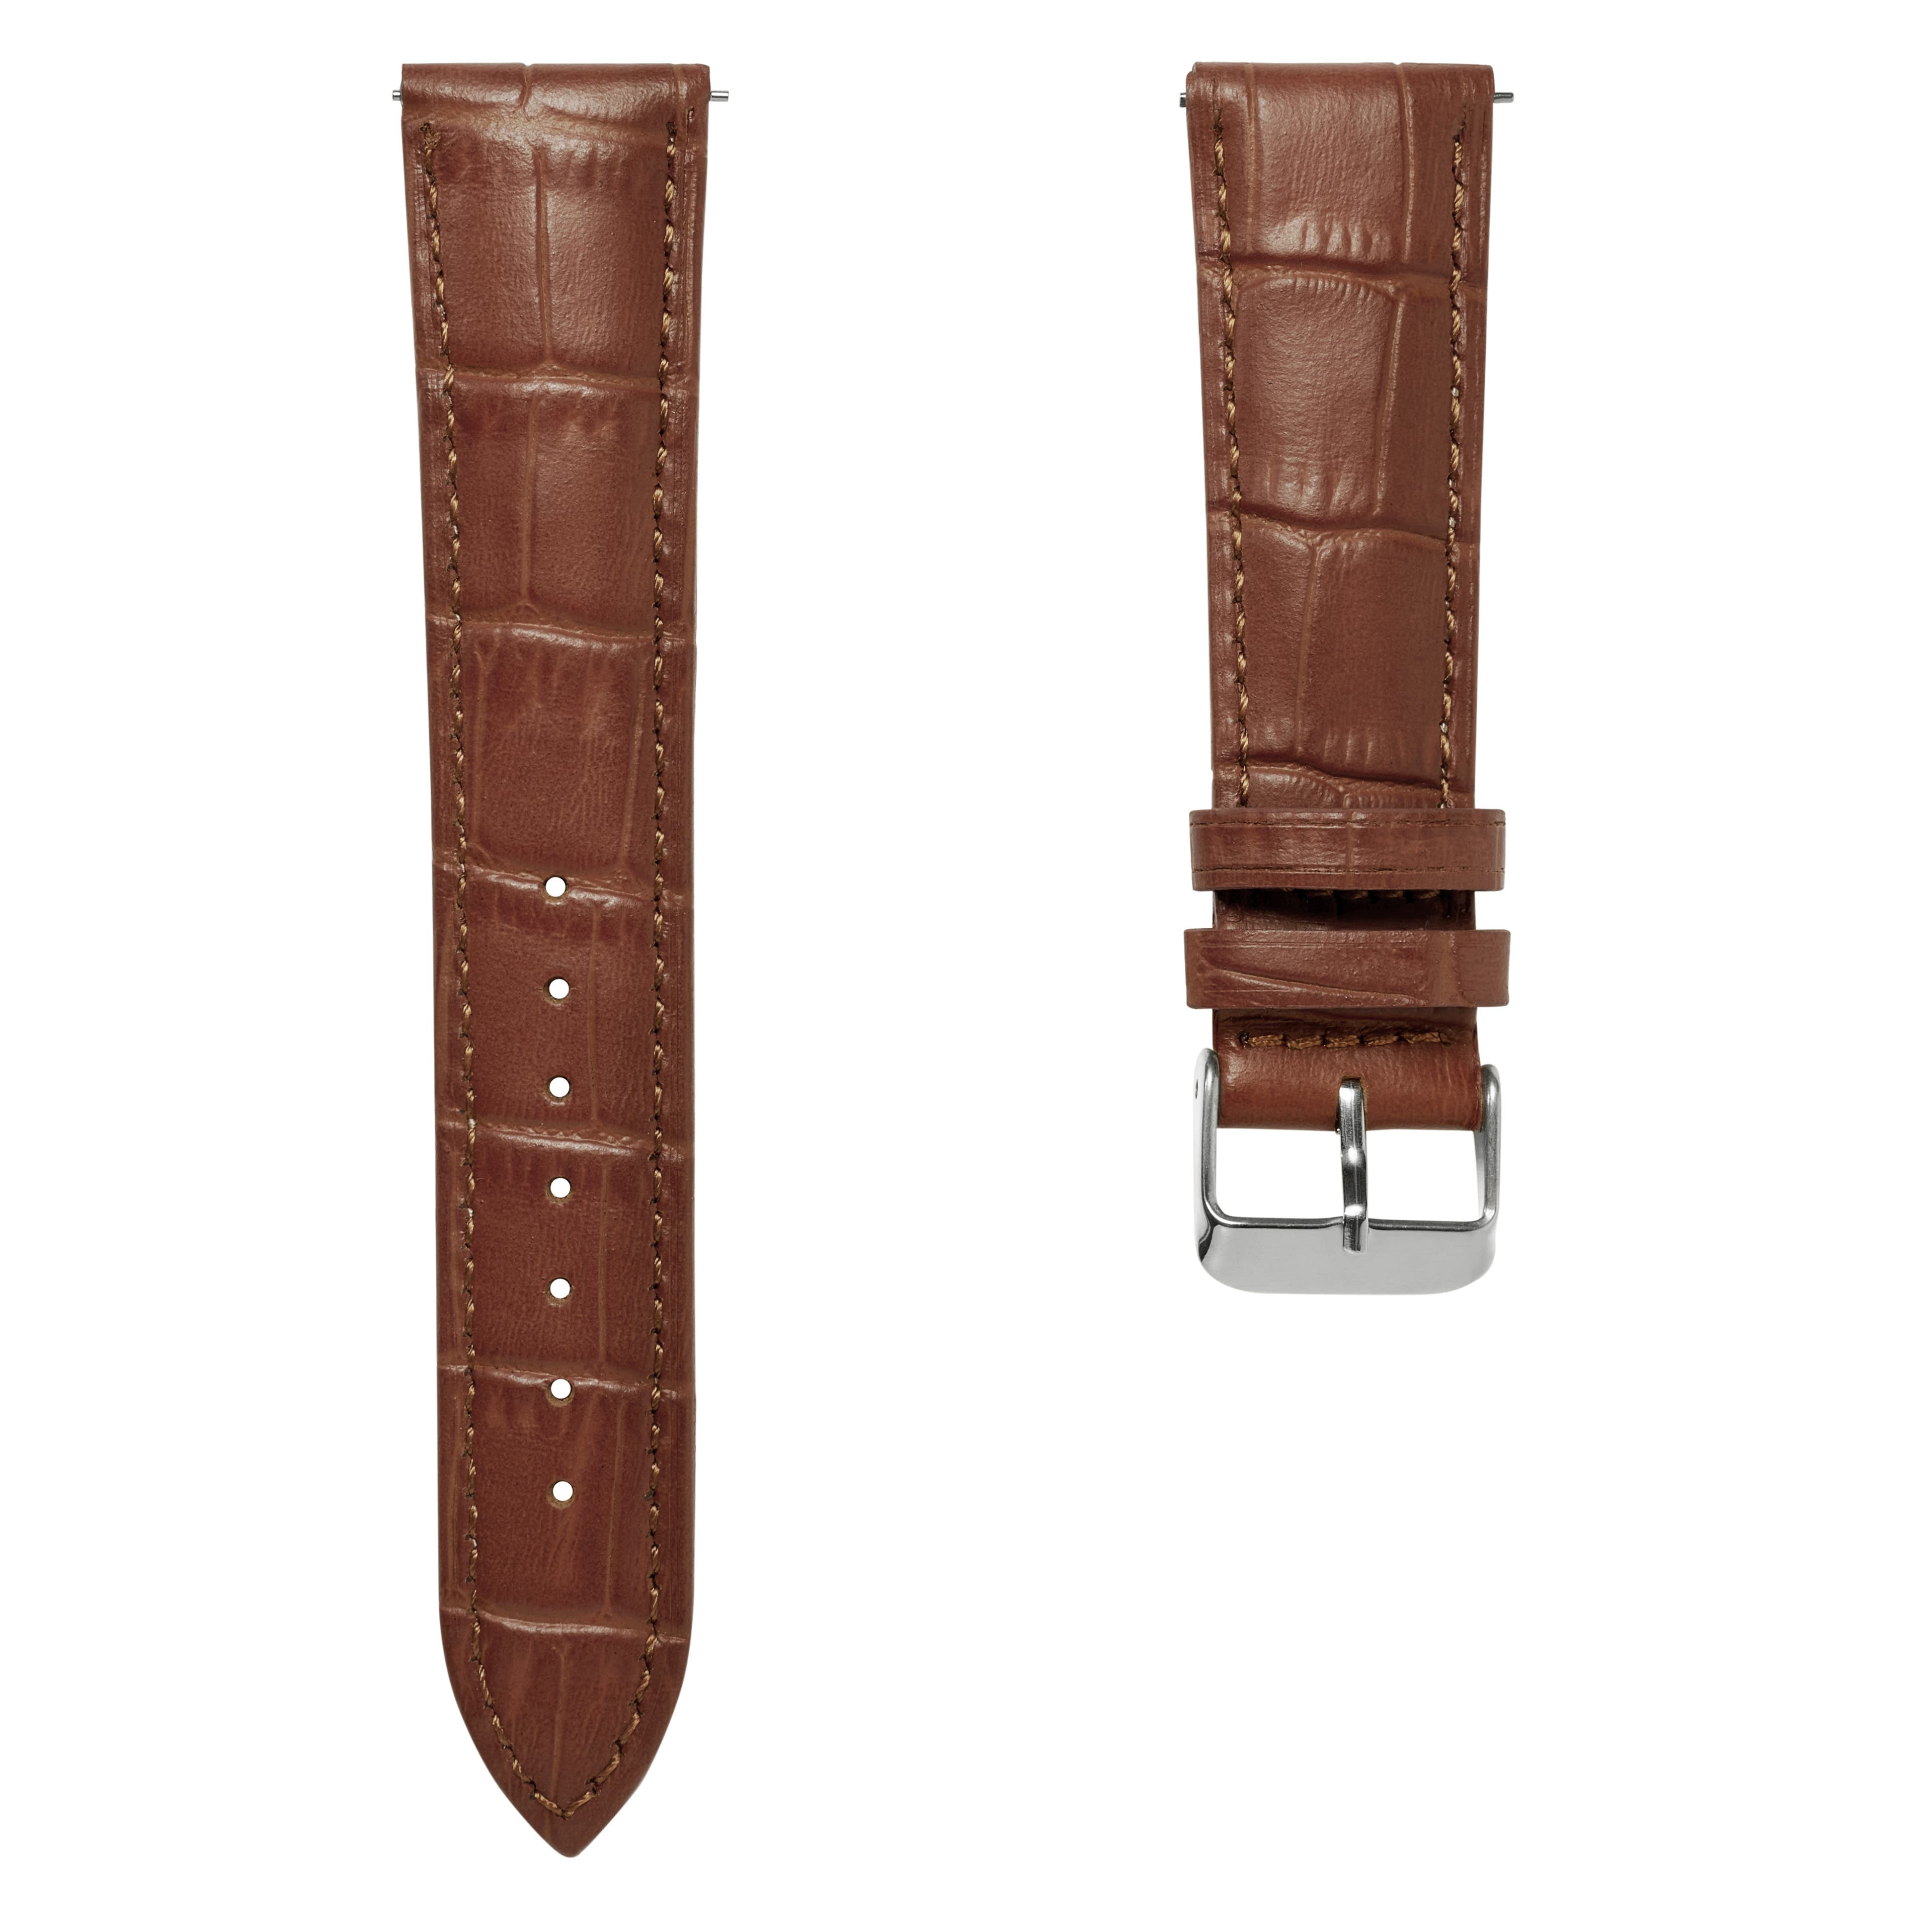 21mm Crocodile-Embossed Tan Leather Watch Strap with Silver-Tone Buckle – Quick Release